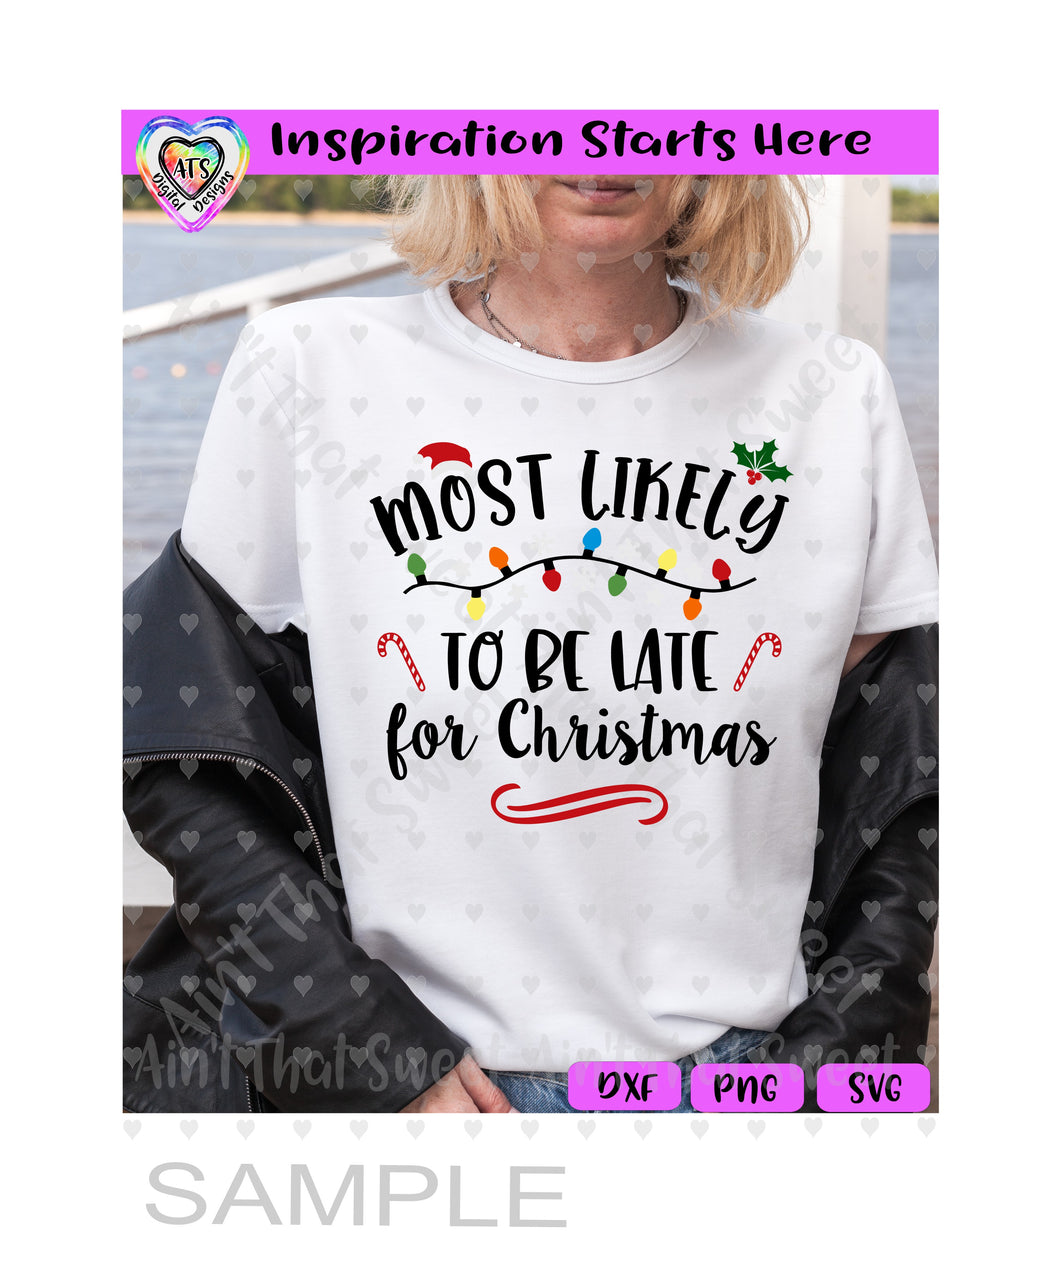 Most Likely To Be Late For Christmas - Transparent PNG SVG DXF - Silhouette, Cricut, ScanNCut